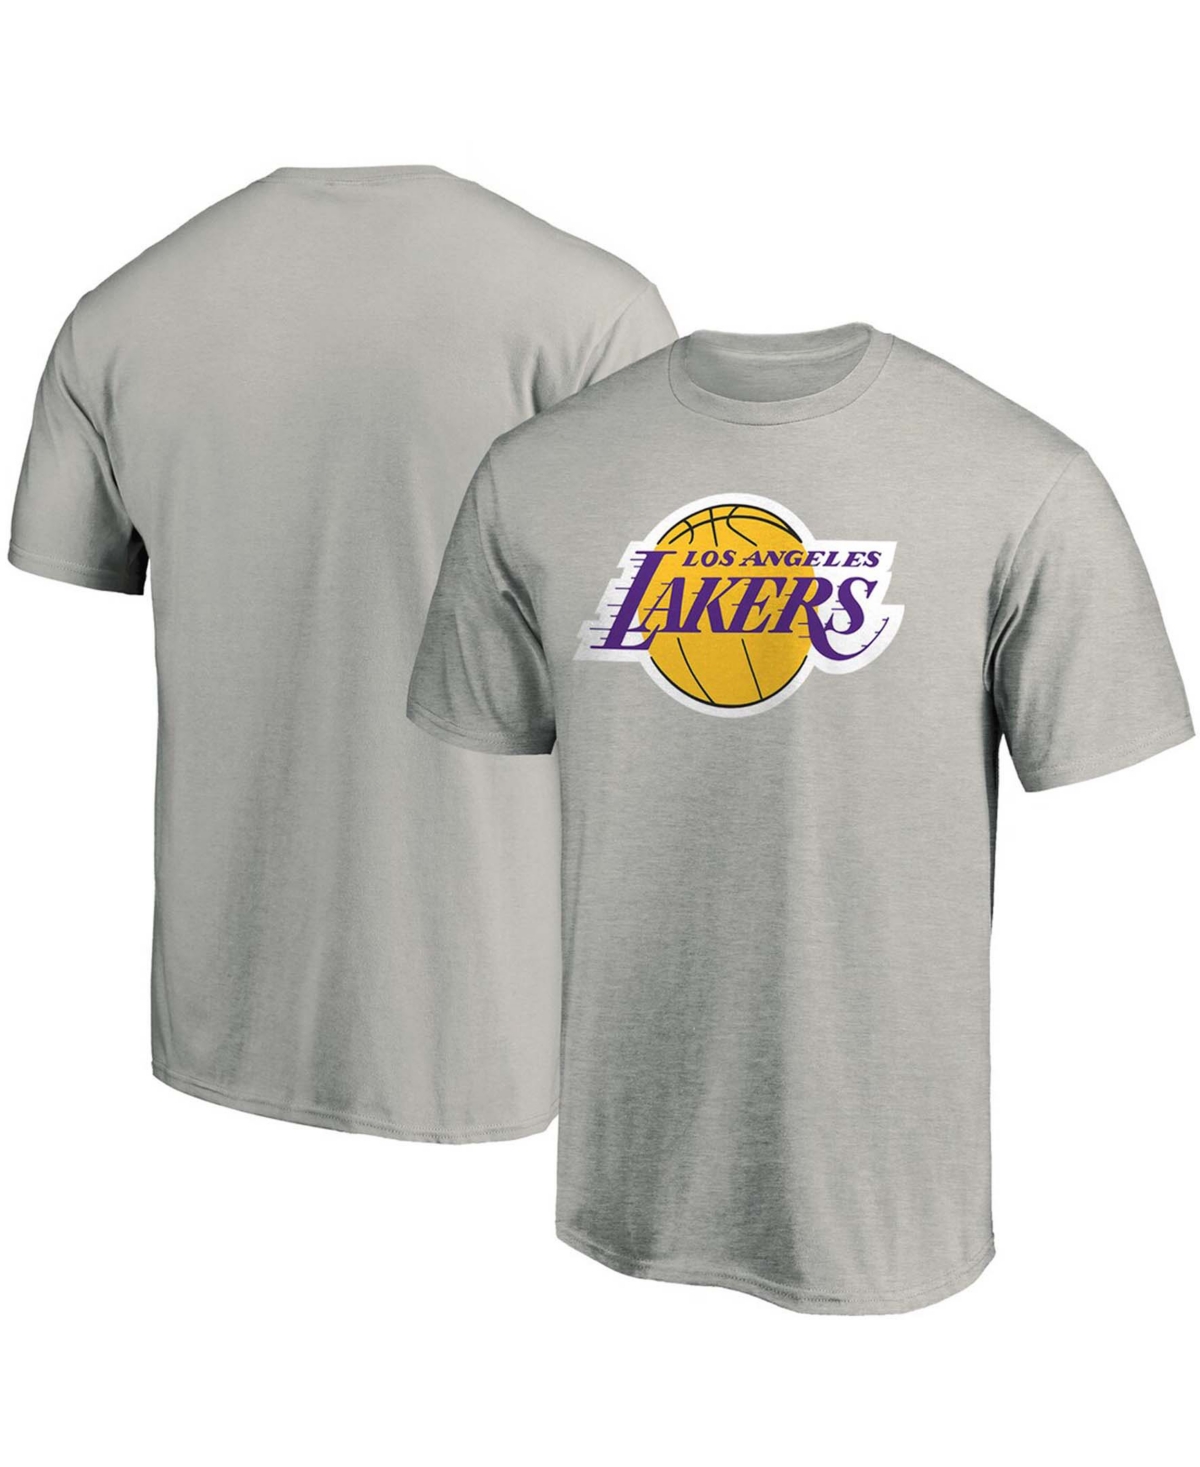 Men's Heathered Gray Los Angeles Lakers Primary Team Logo T-shirt - Heather Gray